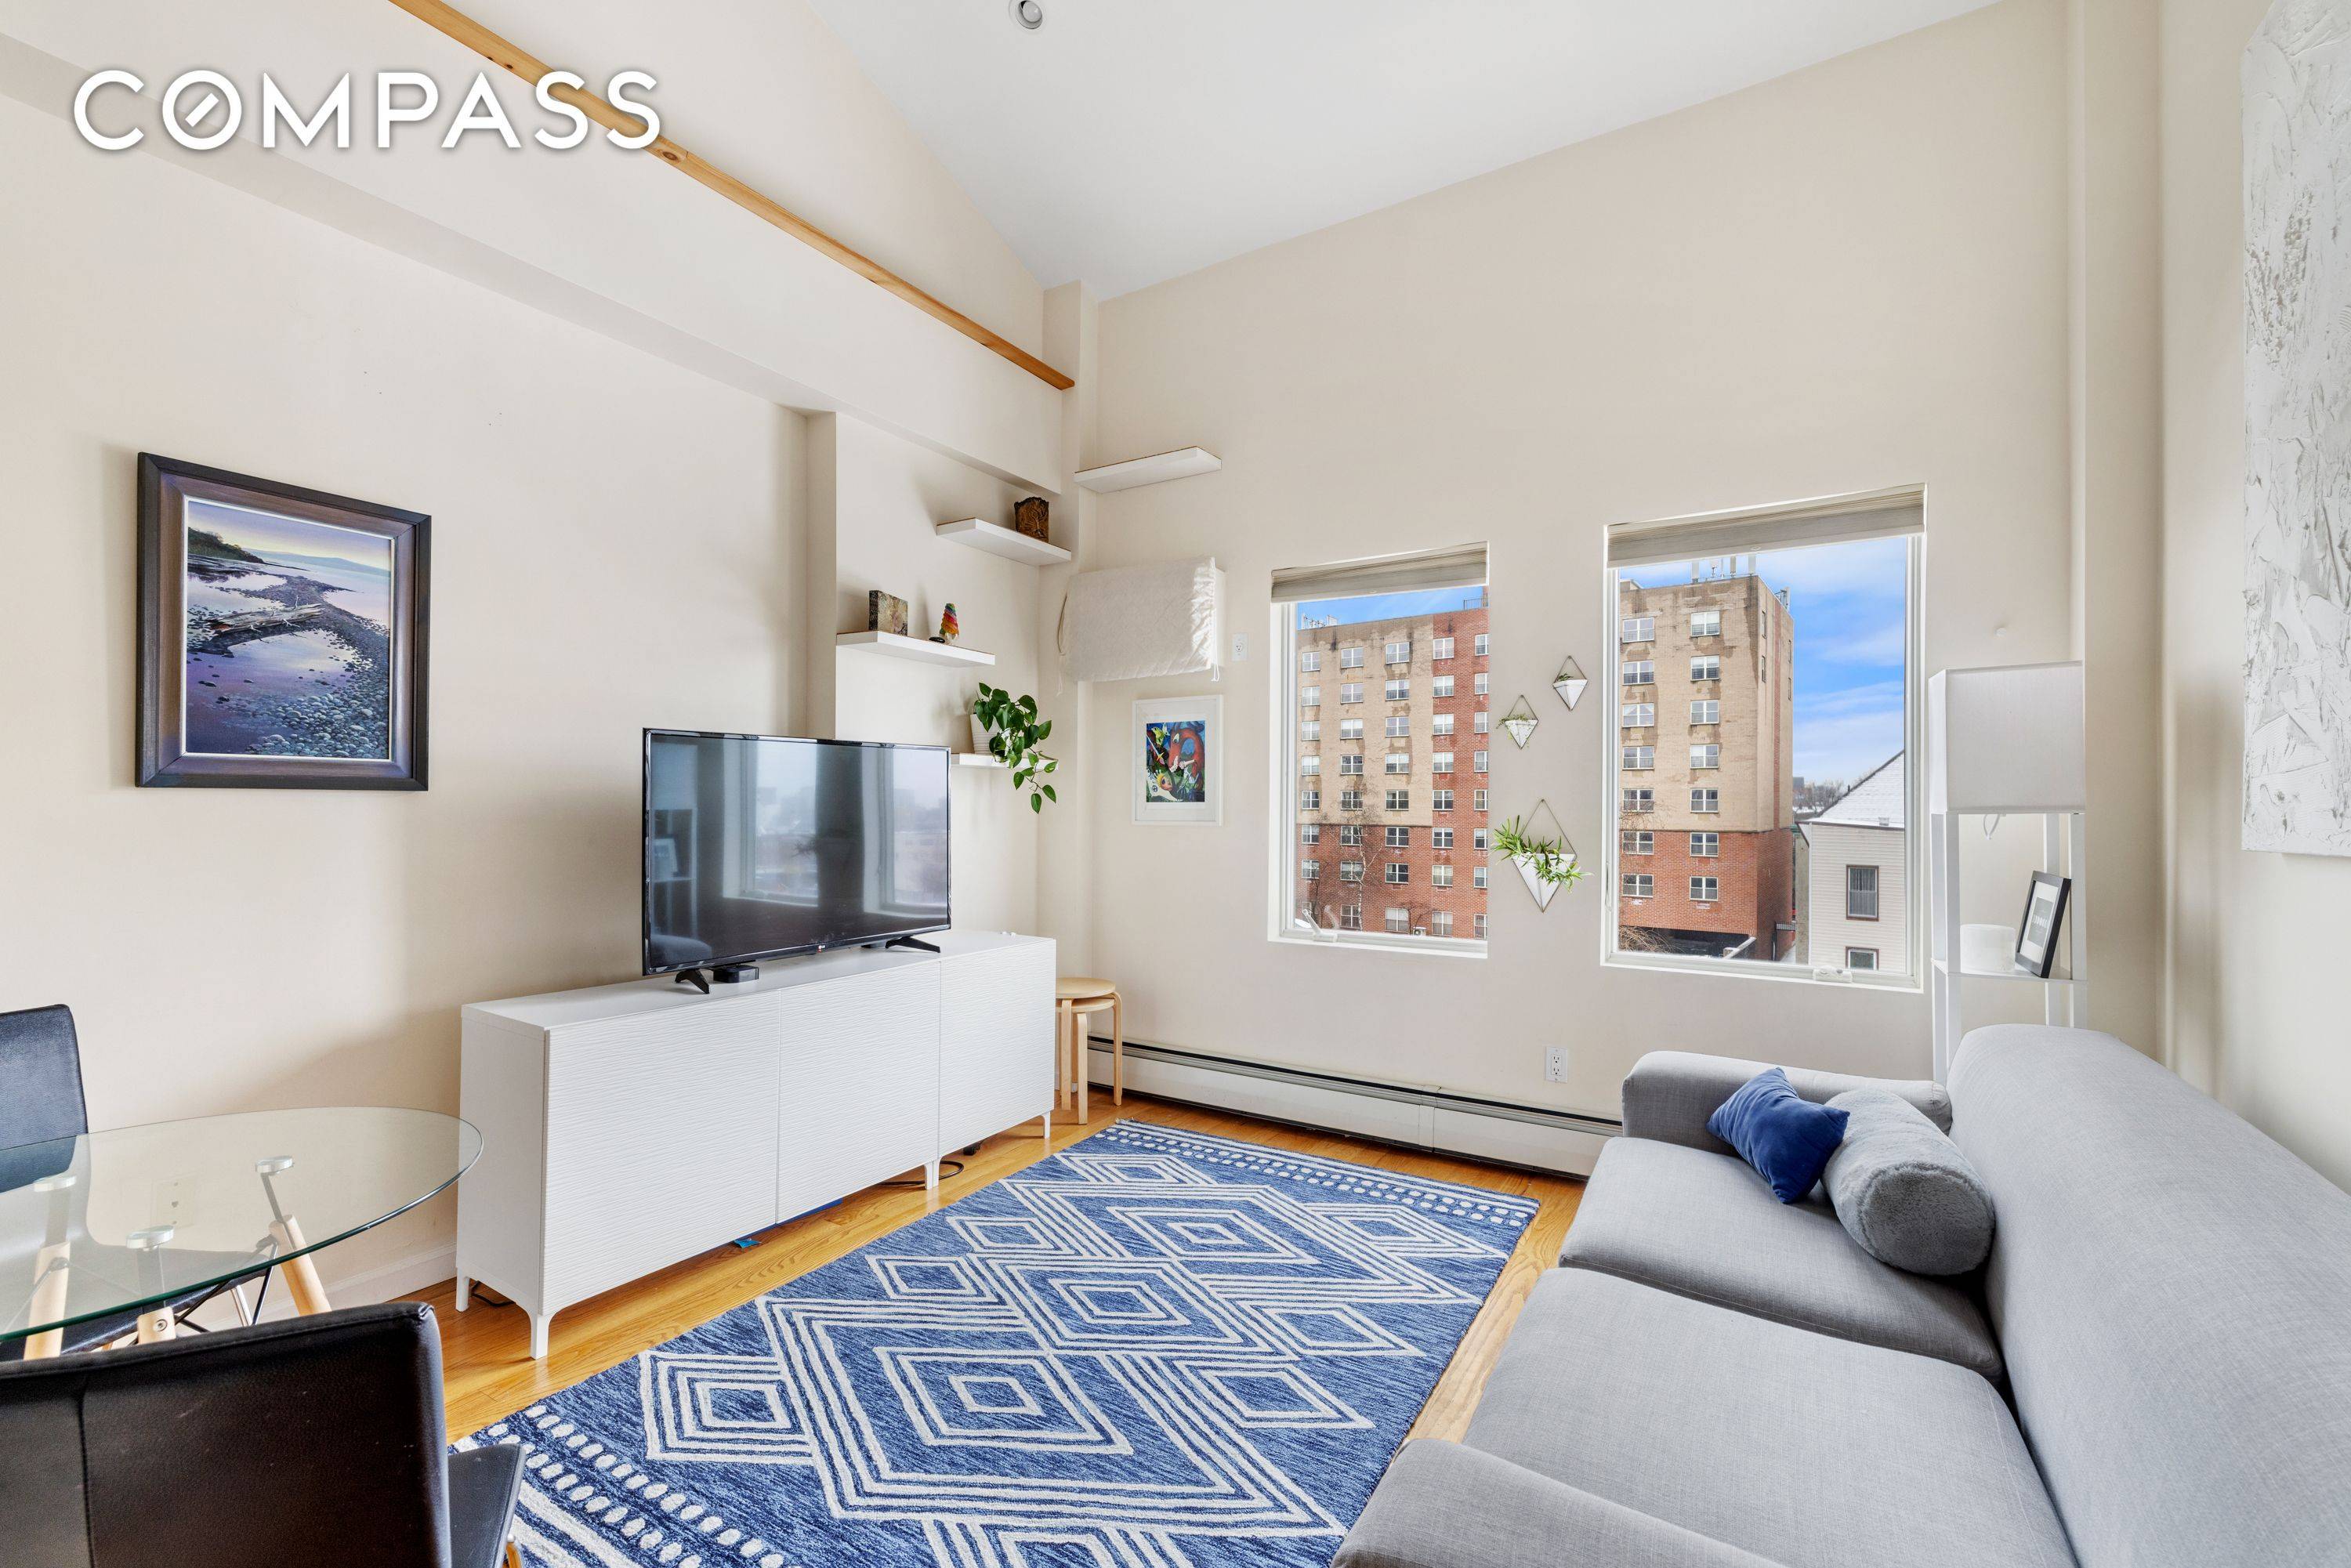 Sunshine, open skies and versatility will greet you upon entering this top floor duplex in the heart of South Slope.